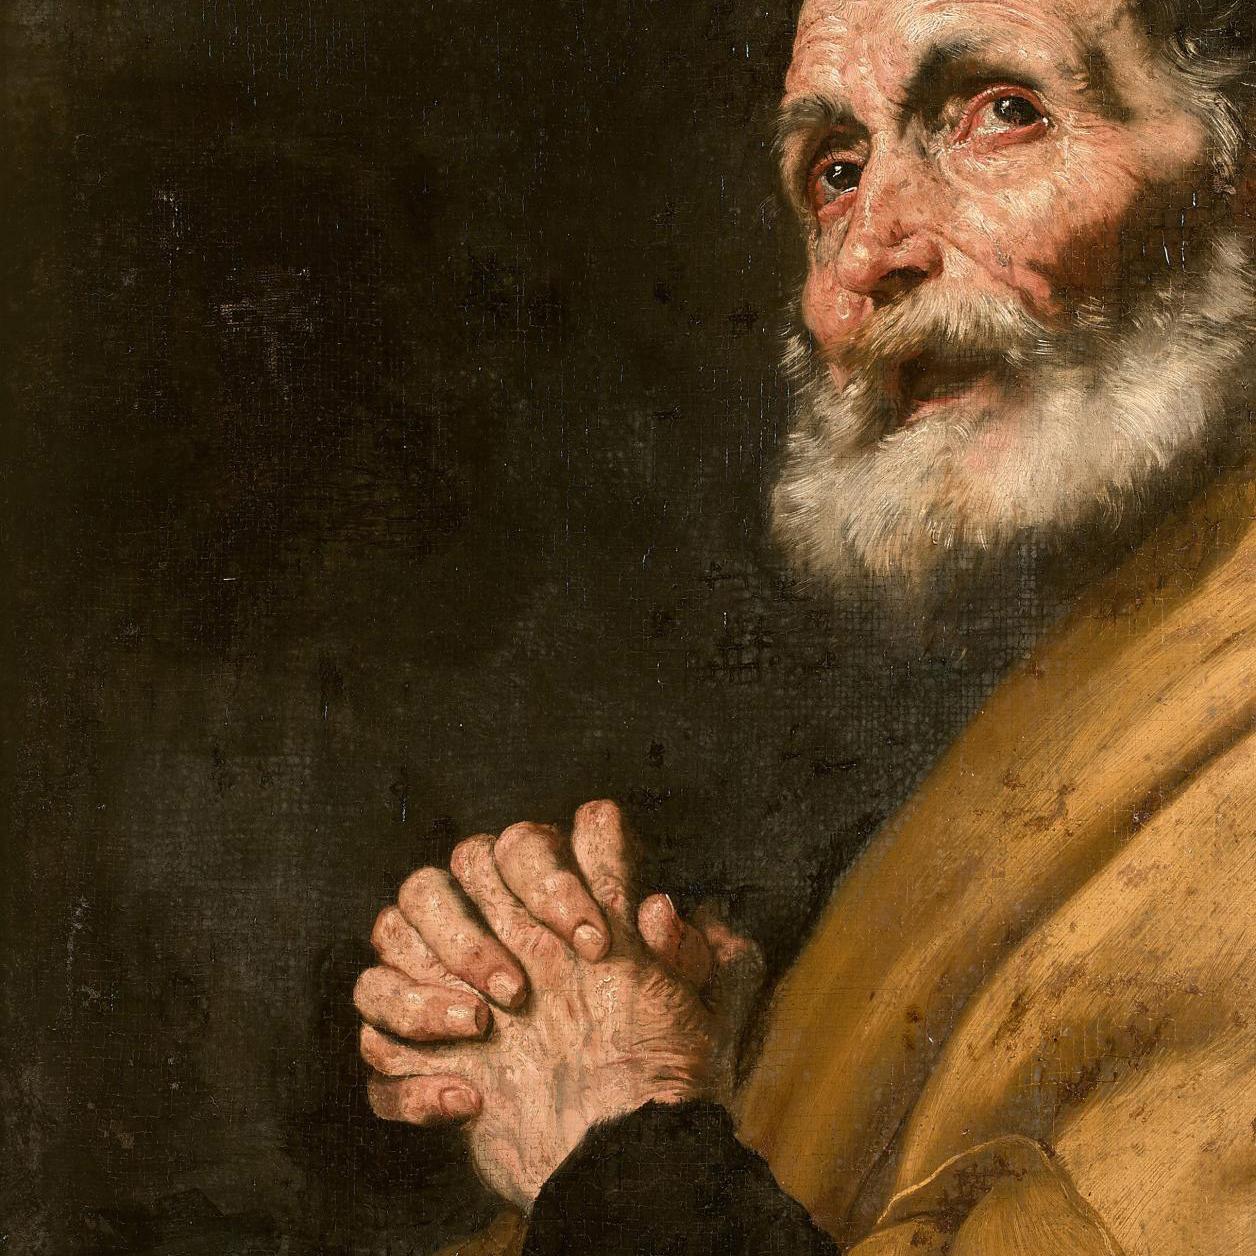 First Appearance at Auction of a "Saint Peter" by Jusepe de Ribera